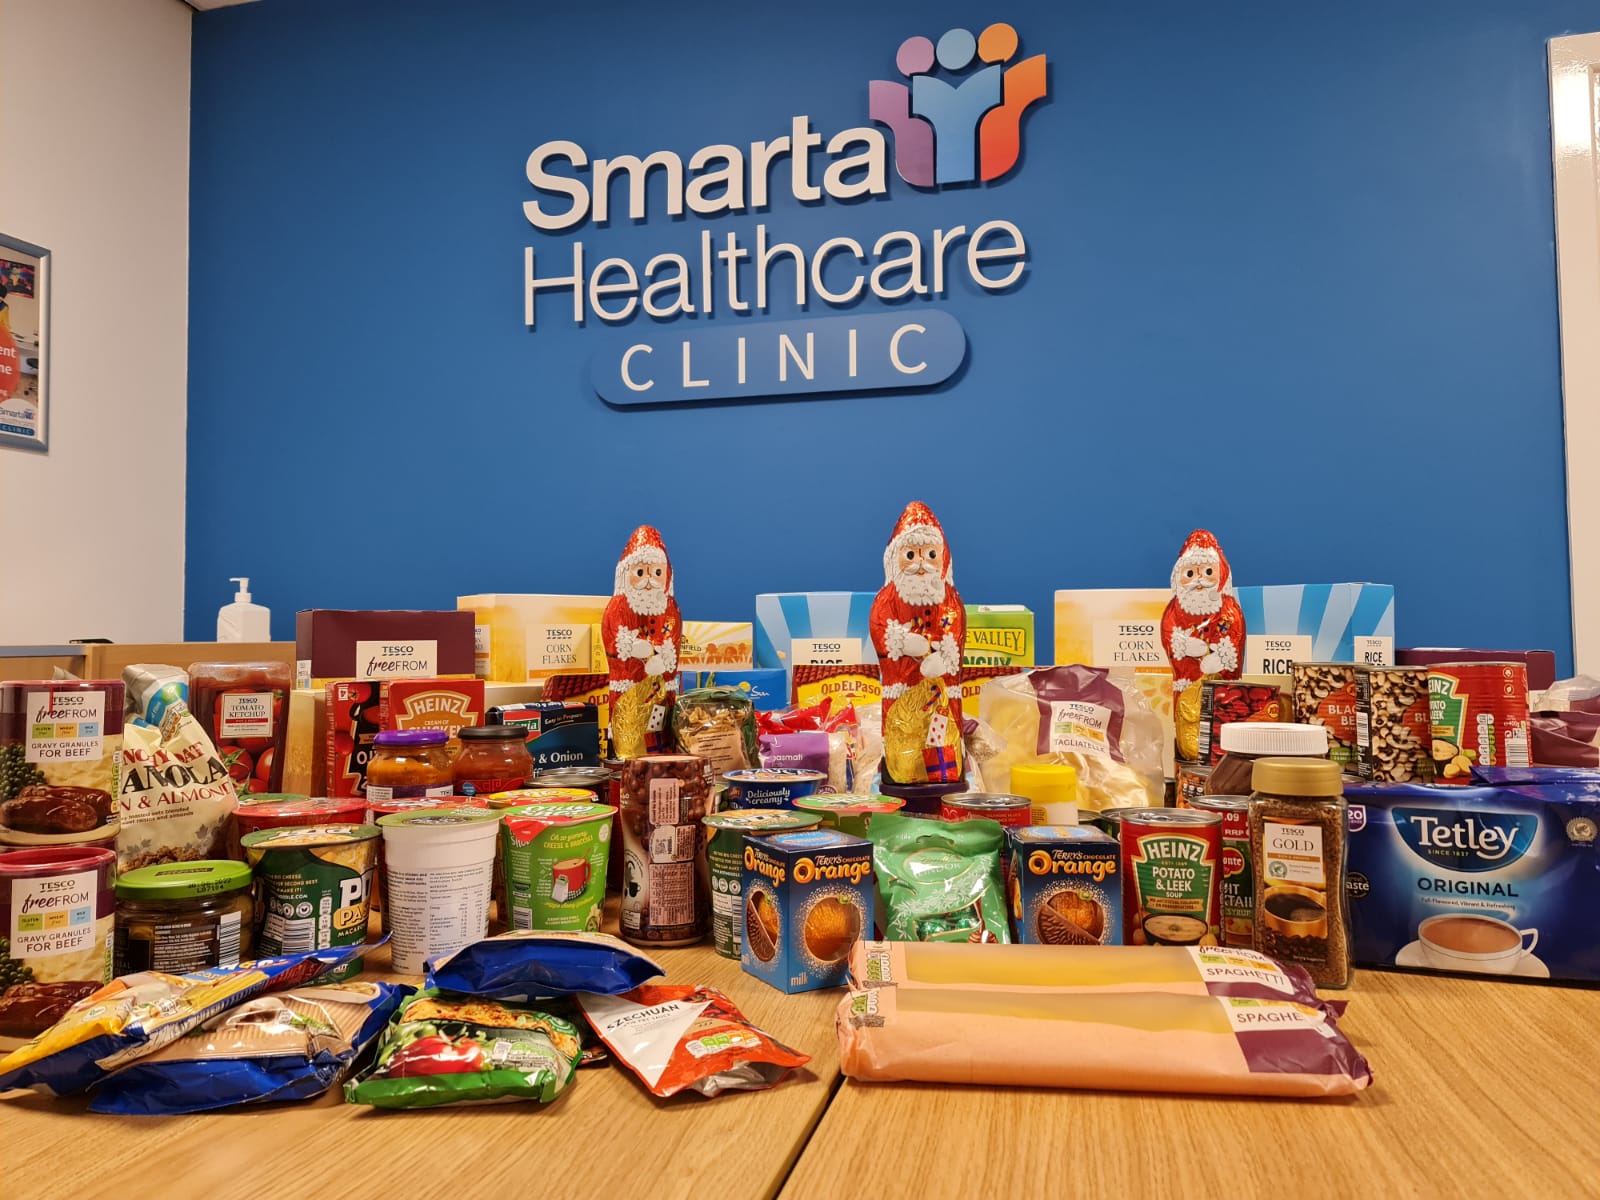 Age UK Bedfordshire food bank receives donation from Smarta Healthcare and Burlington Hall